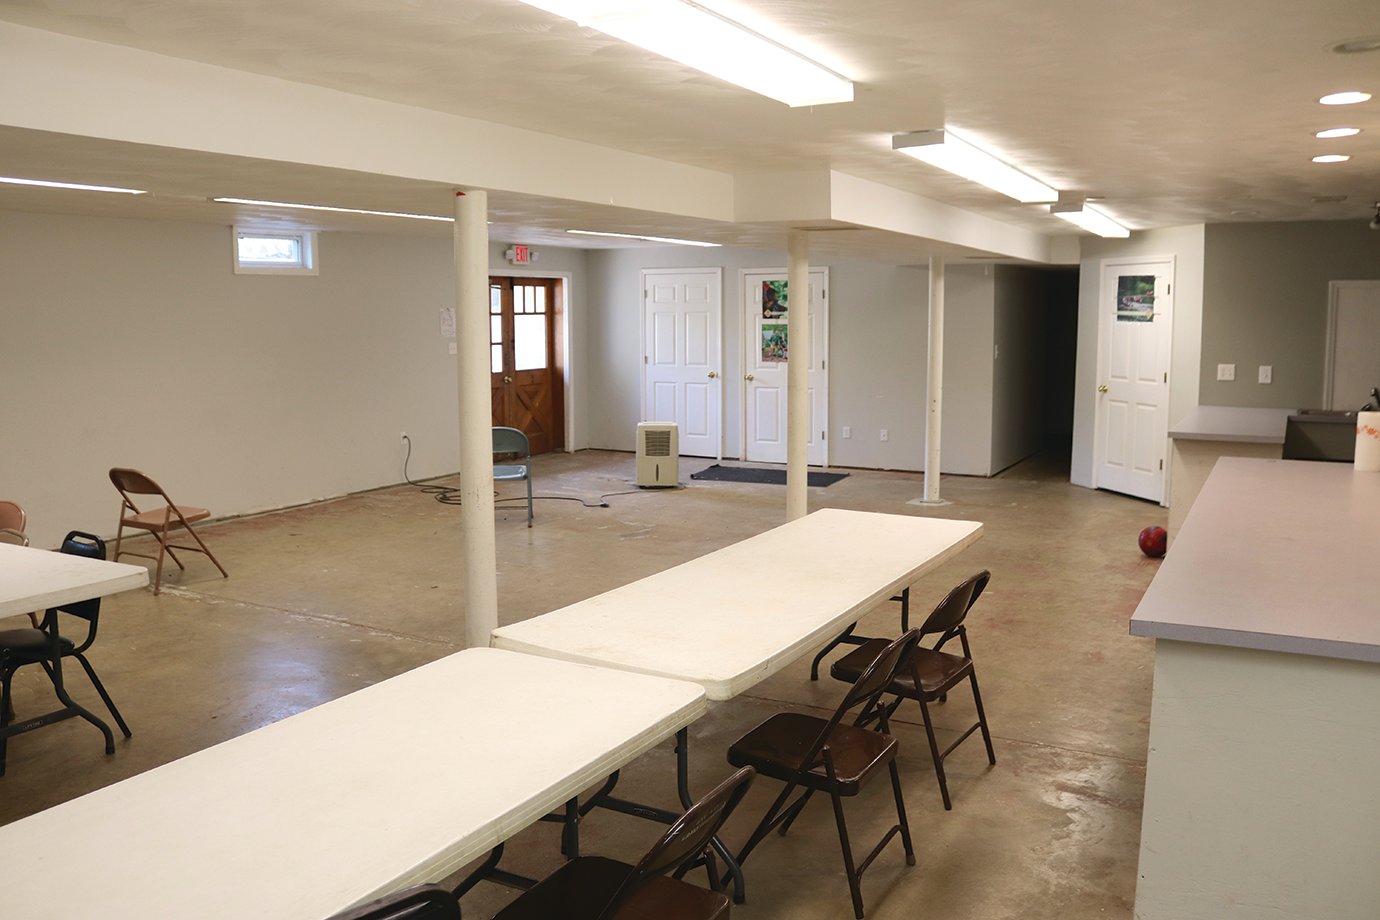 The basement level of the Darlington Conservation Club is transformed from its former derelict state following efforts to revamp the building so it can once again be used for club, 4-H, FFA and Scouts events.